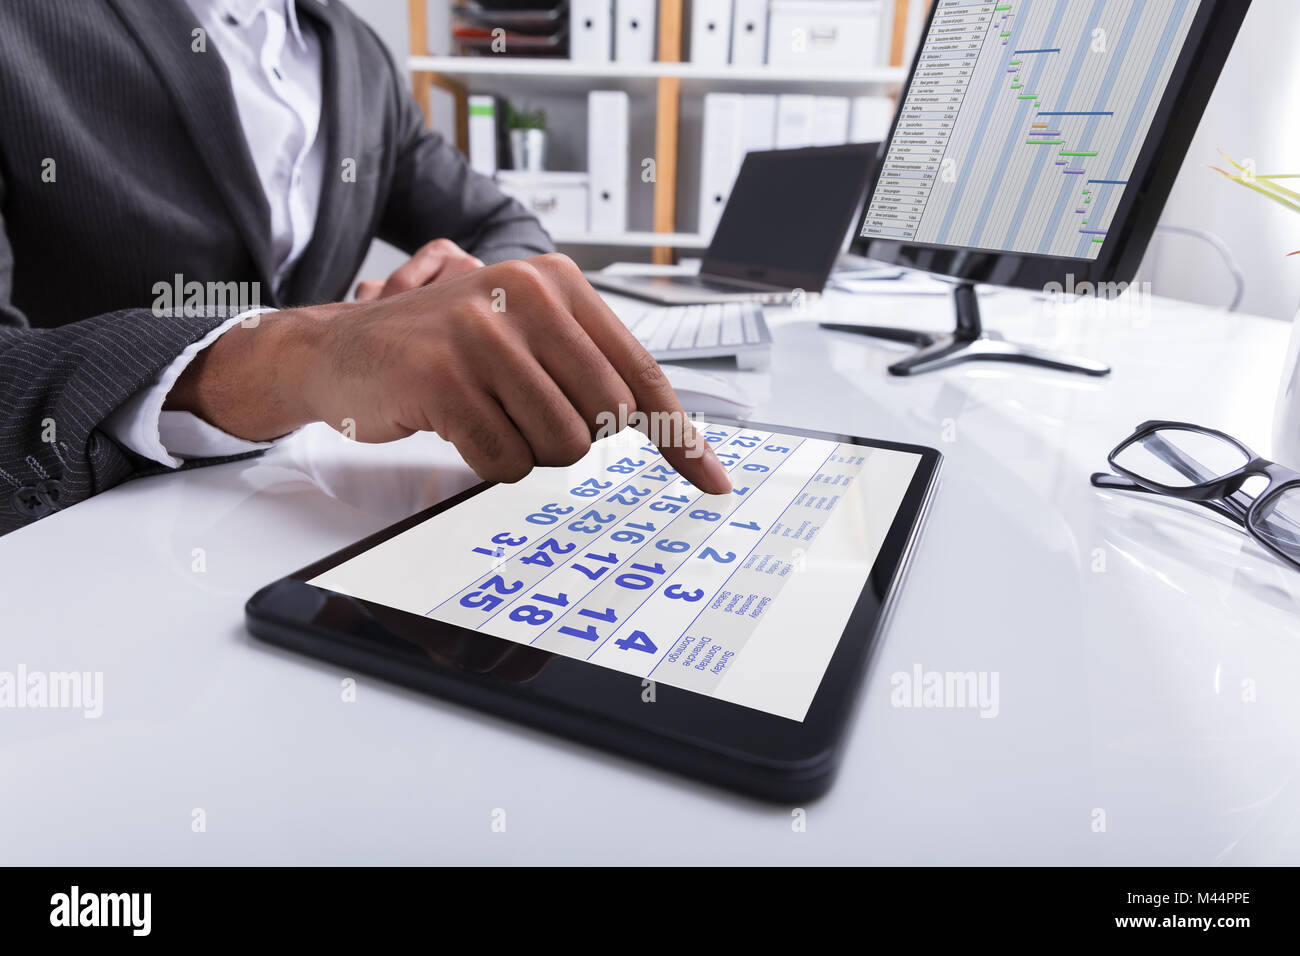 Close-up Of A Businessperson's Hand Using Calendar On Digital Tablet At Workplace Stock Photo